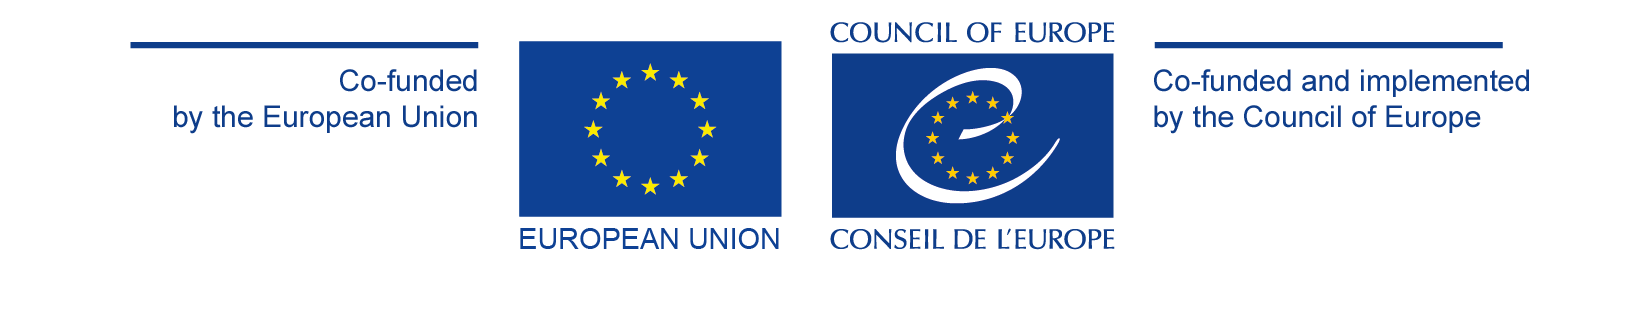 Logos of the Council of Europe and the European Union